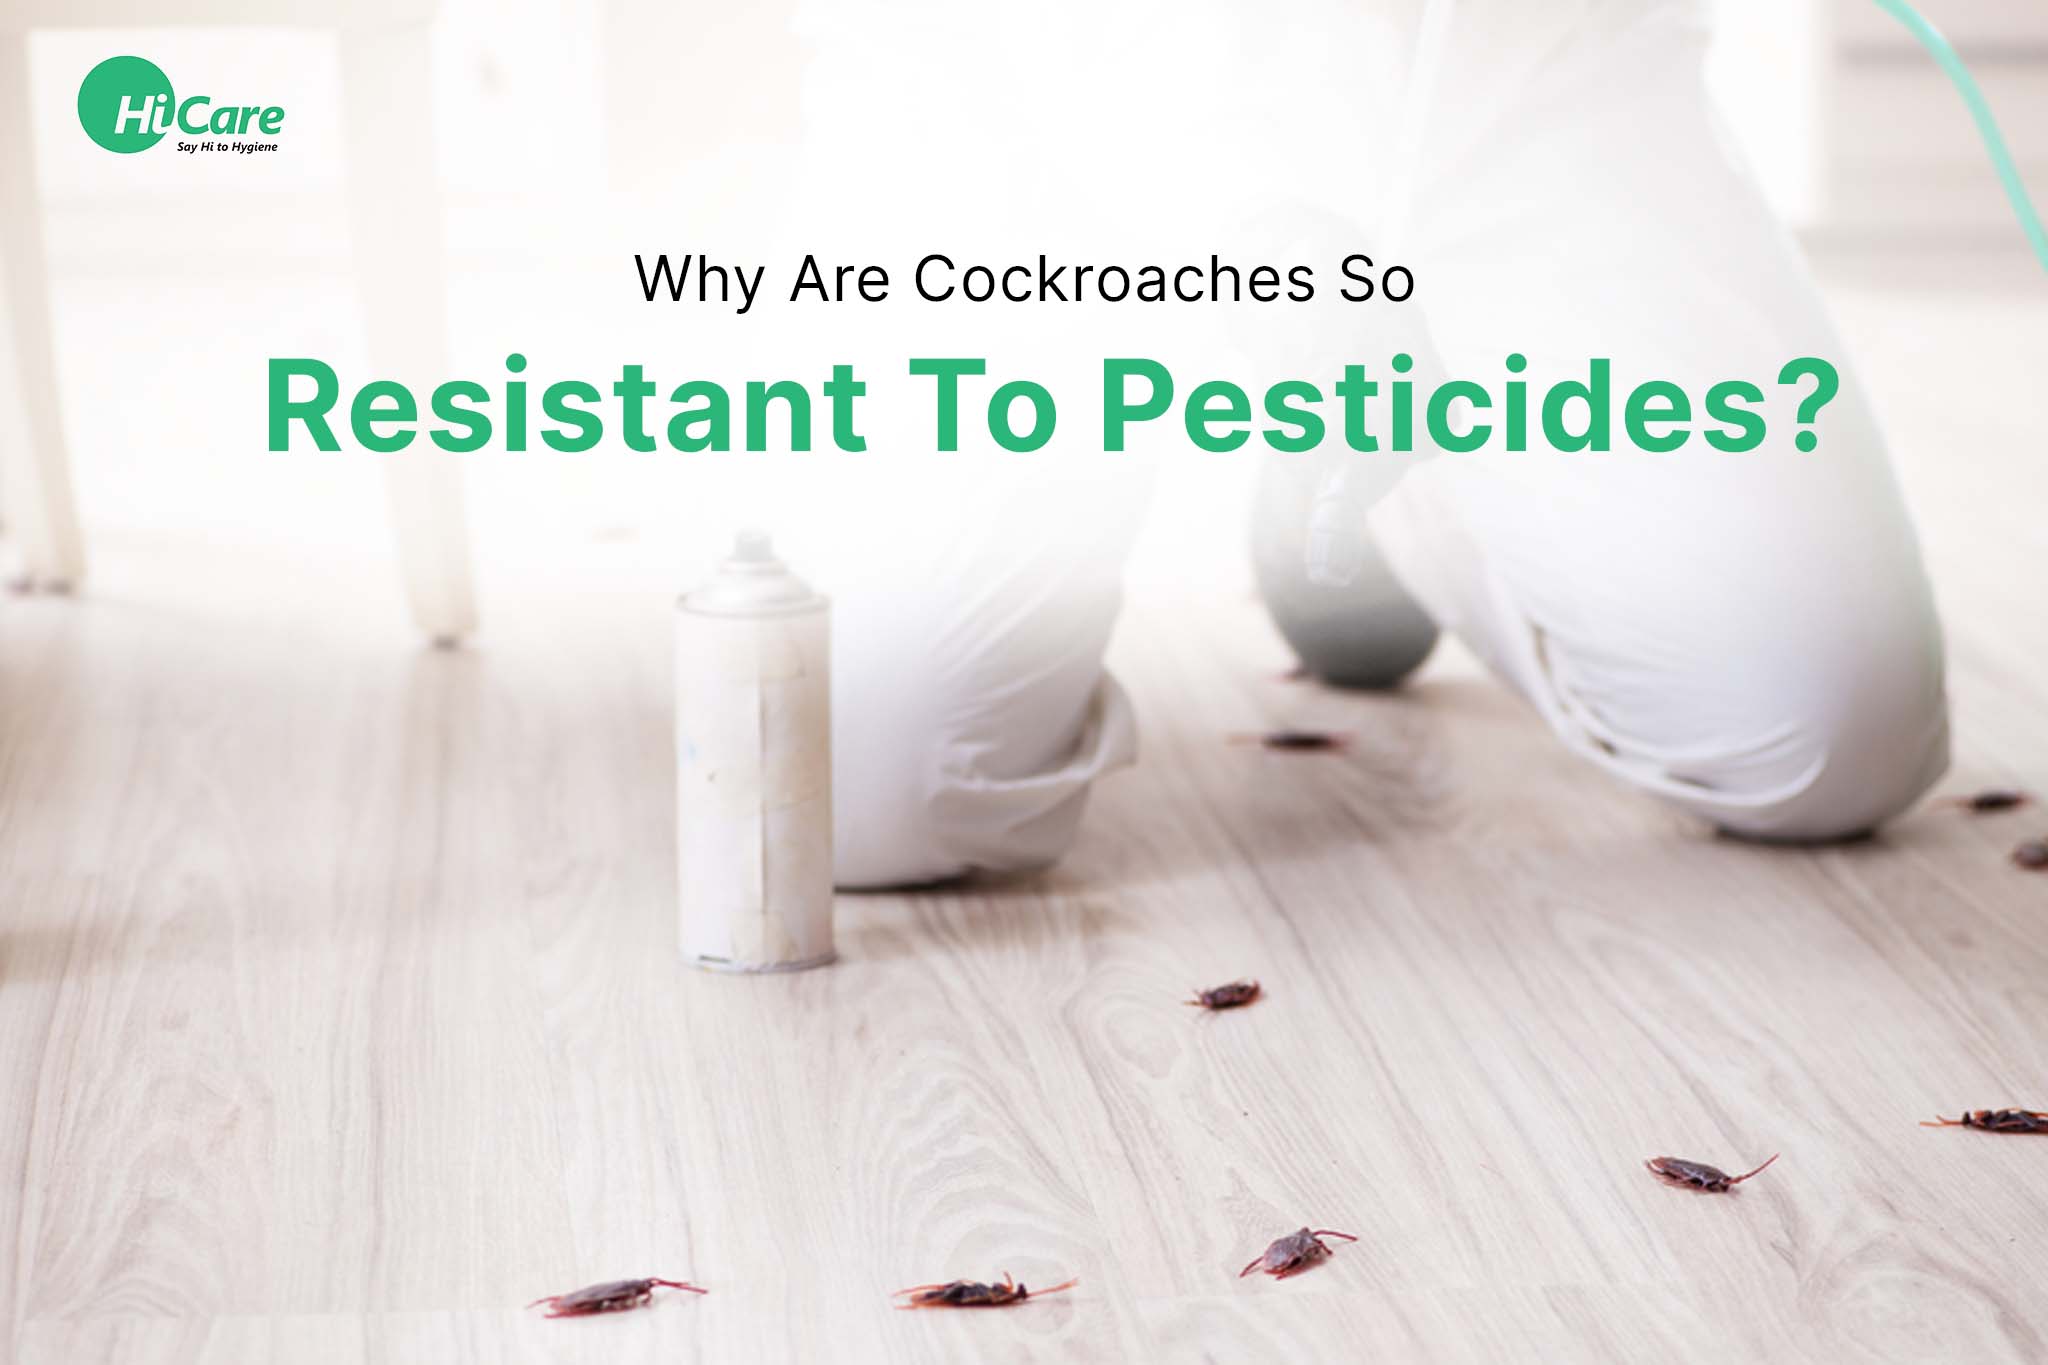 Why Are Cockroaches So Resistant To Pesticides?